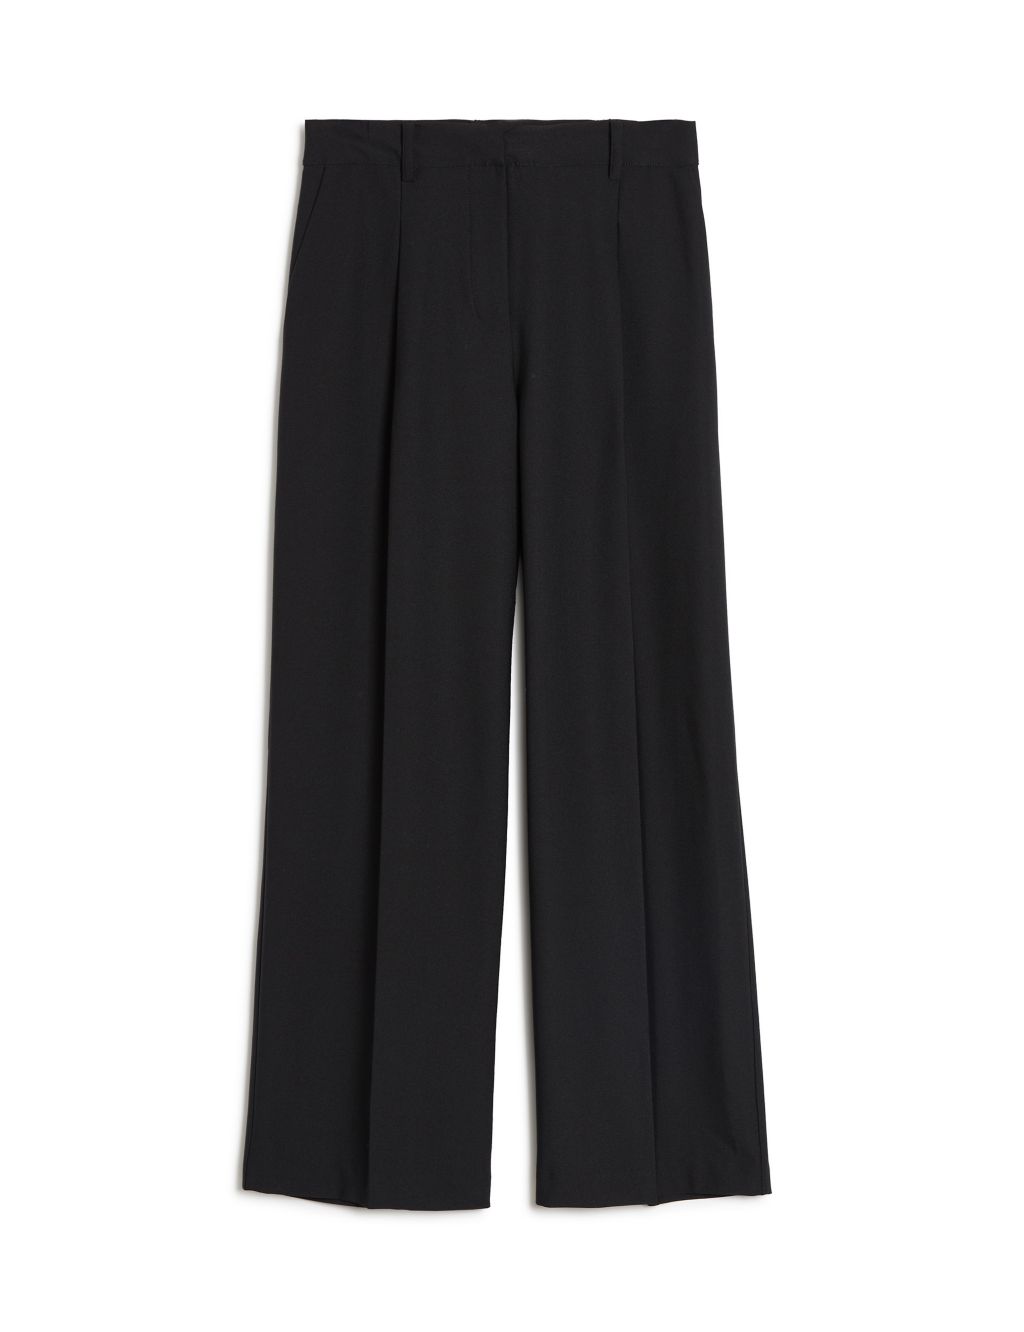 Pleat Front Wide Leg Chinos image 2